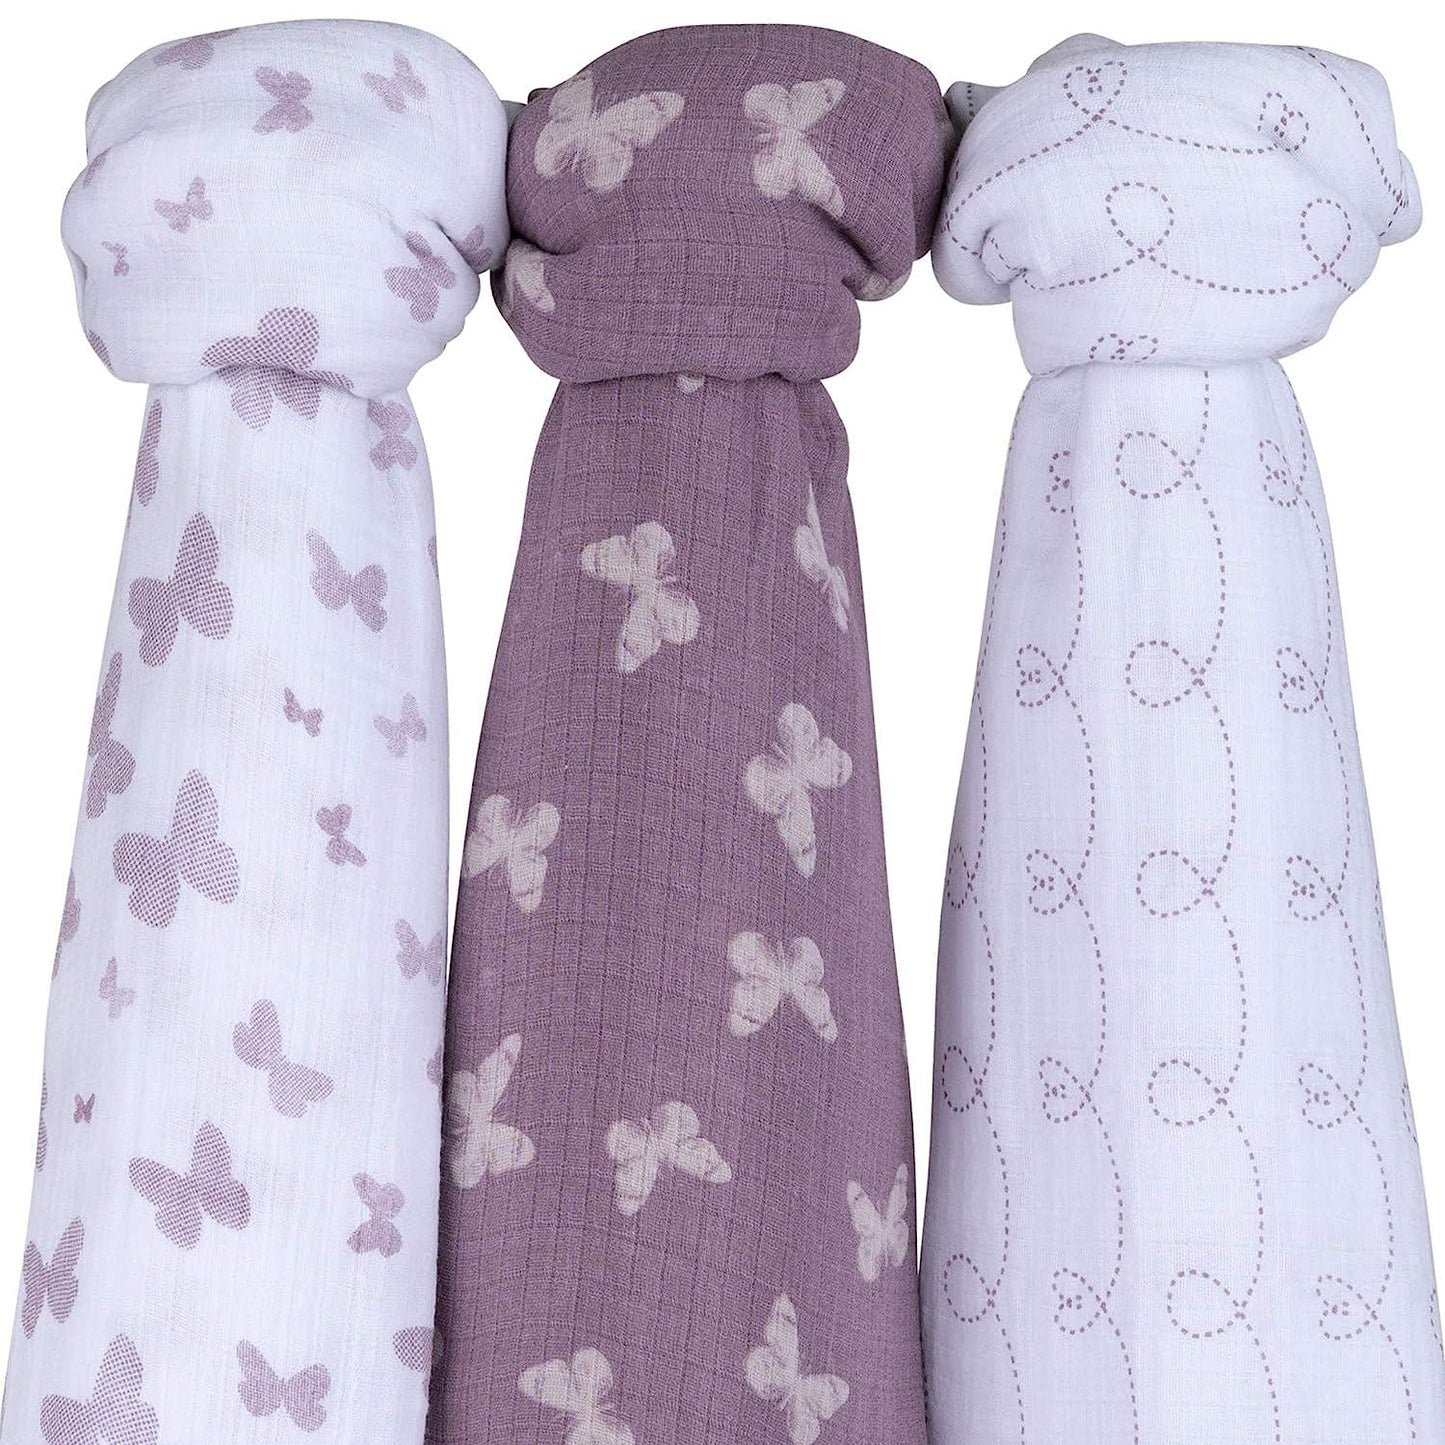 Ely's and Co. Muslin Swaddle Blanket 100% Soft Muslin Cotton 3 Pack 47 x 47 (Lavender Butterfly)